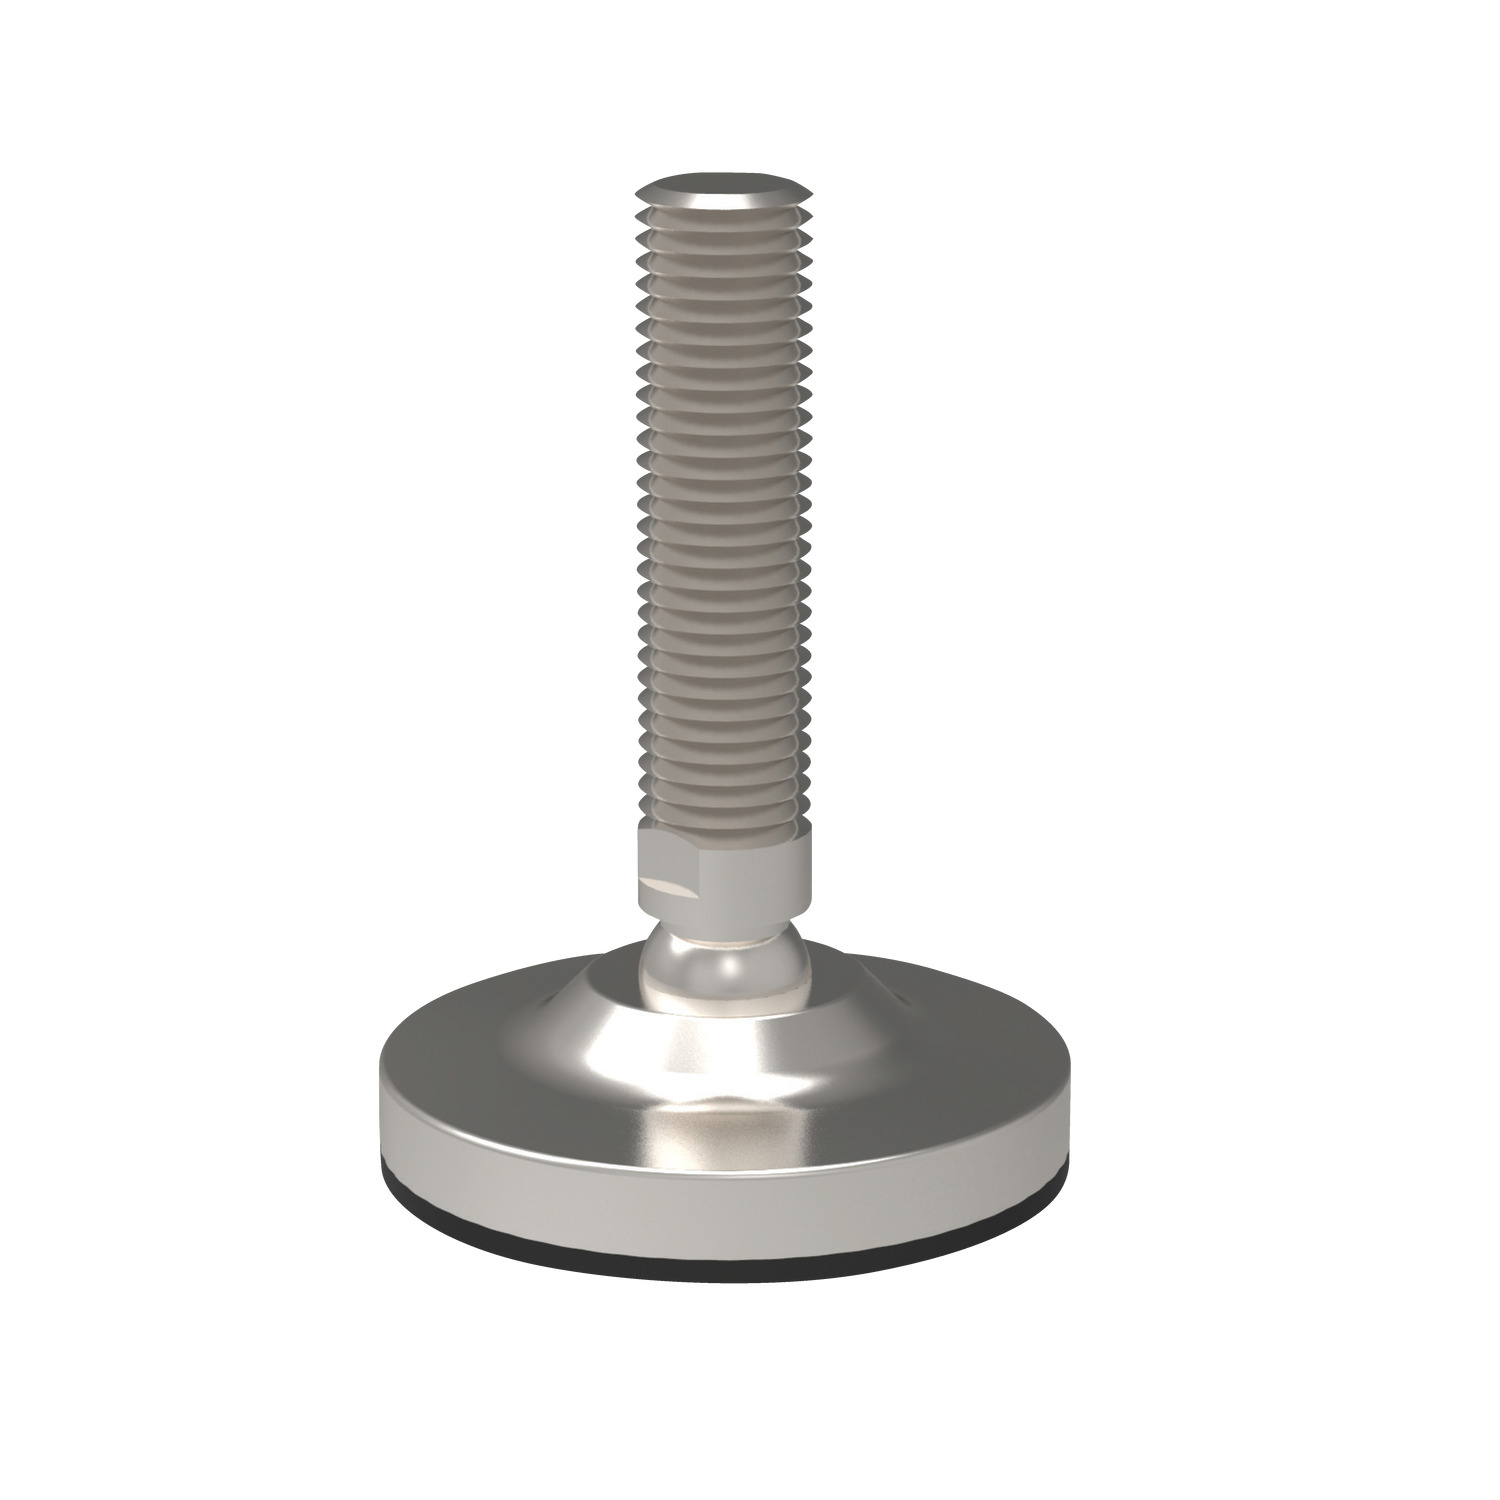 Levelling Feet Levelling Feet provide height adjustable support for equipment and machinery.